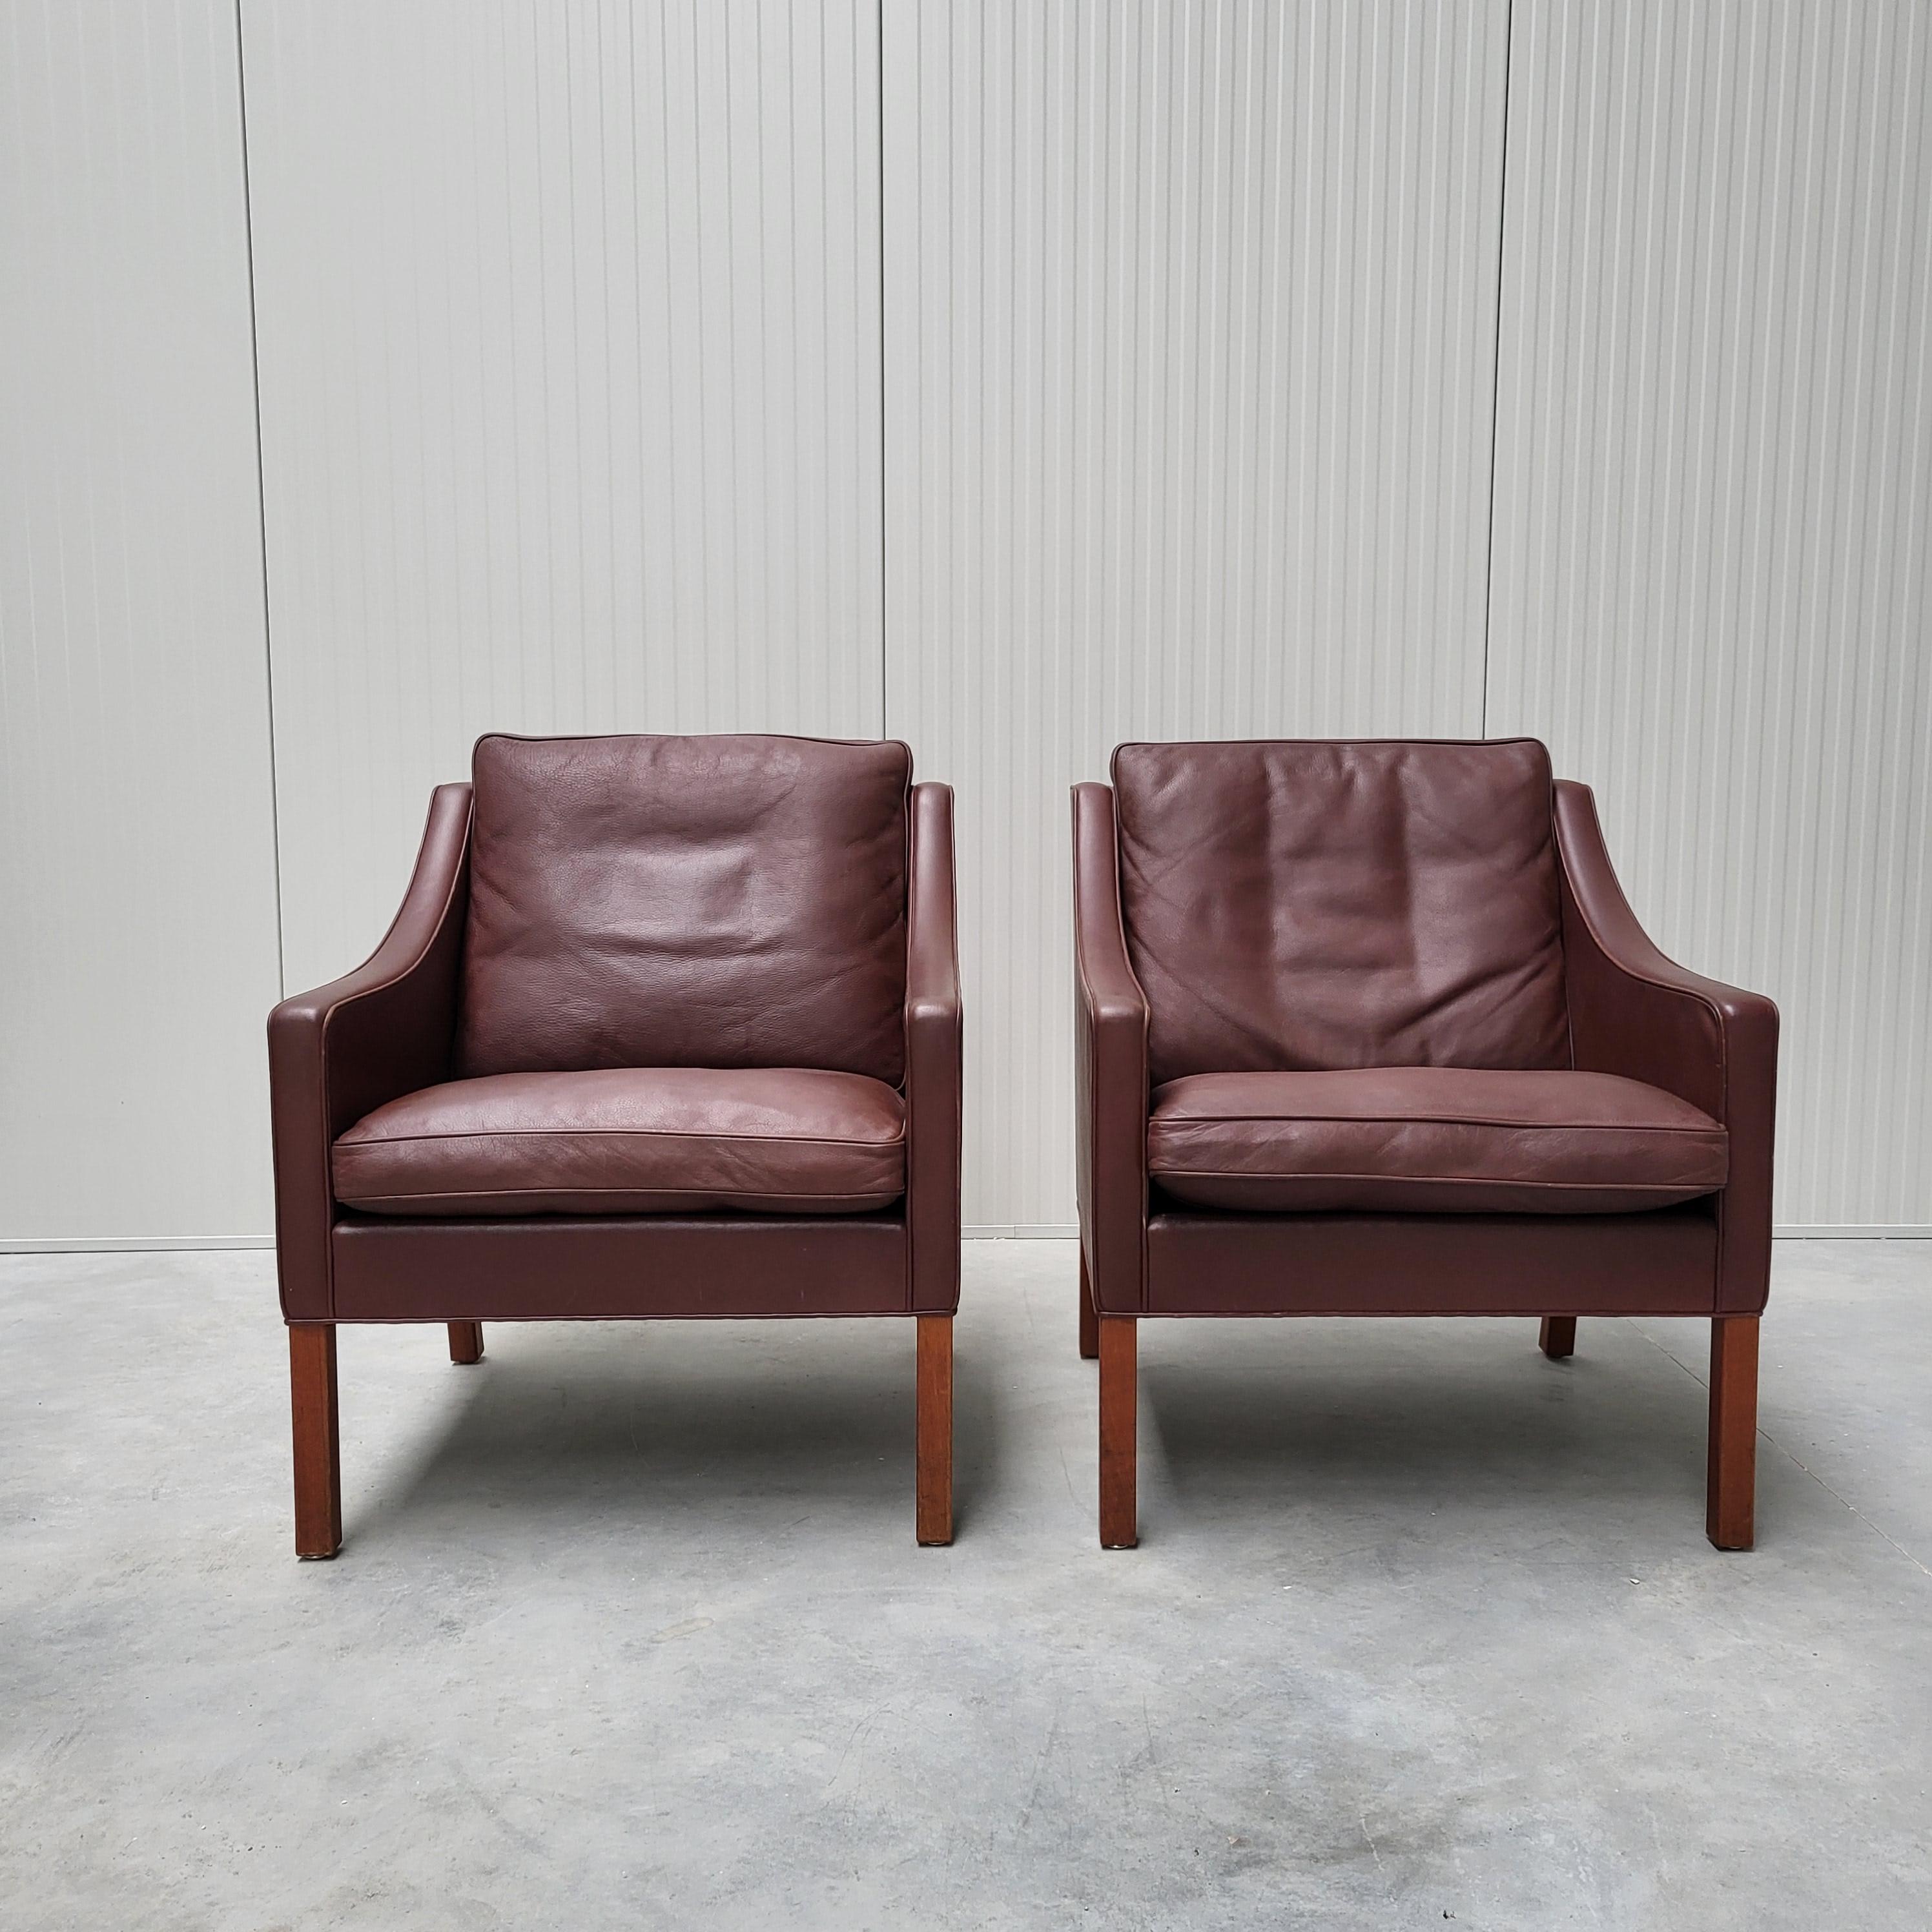 Amazing club chairs mod. BM2207 designed by Børge Mogensen and produced by Fredericia Stolefabrik in Denmark, 1962.

The set comes in a great original condition with a wonderful brown leather upholstery at its best.
Highest quality standard by